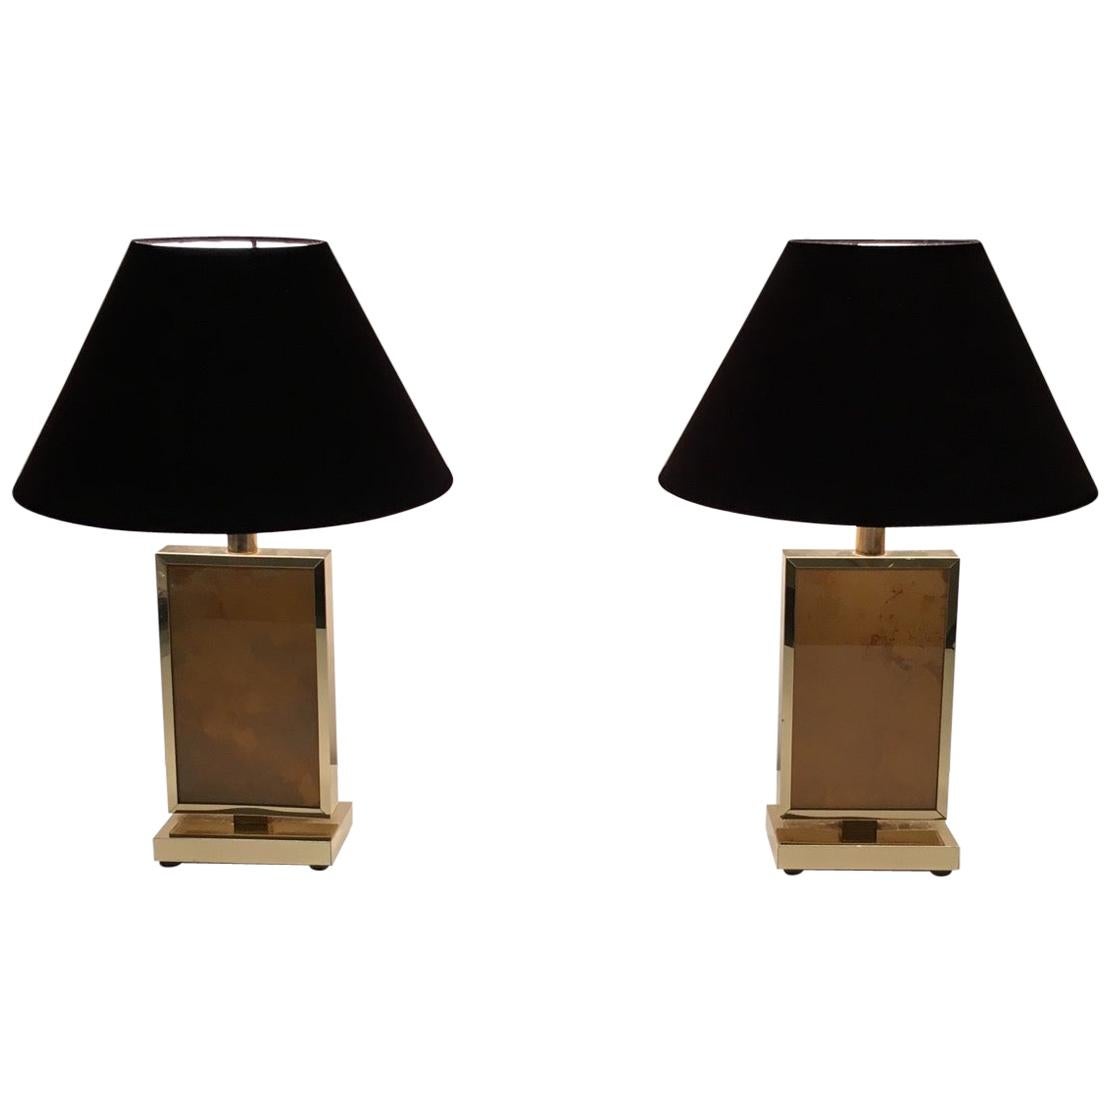 Pair of Gild Lamps, in the Style of Aldo Tura, circa 1970